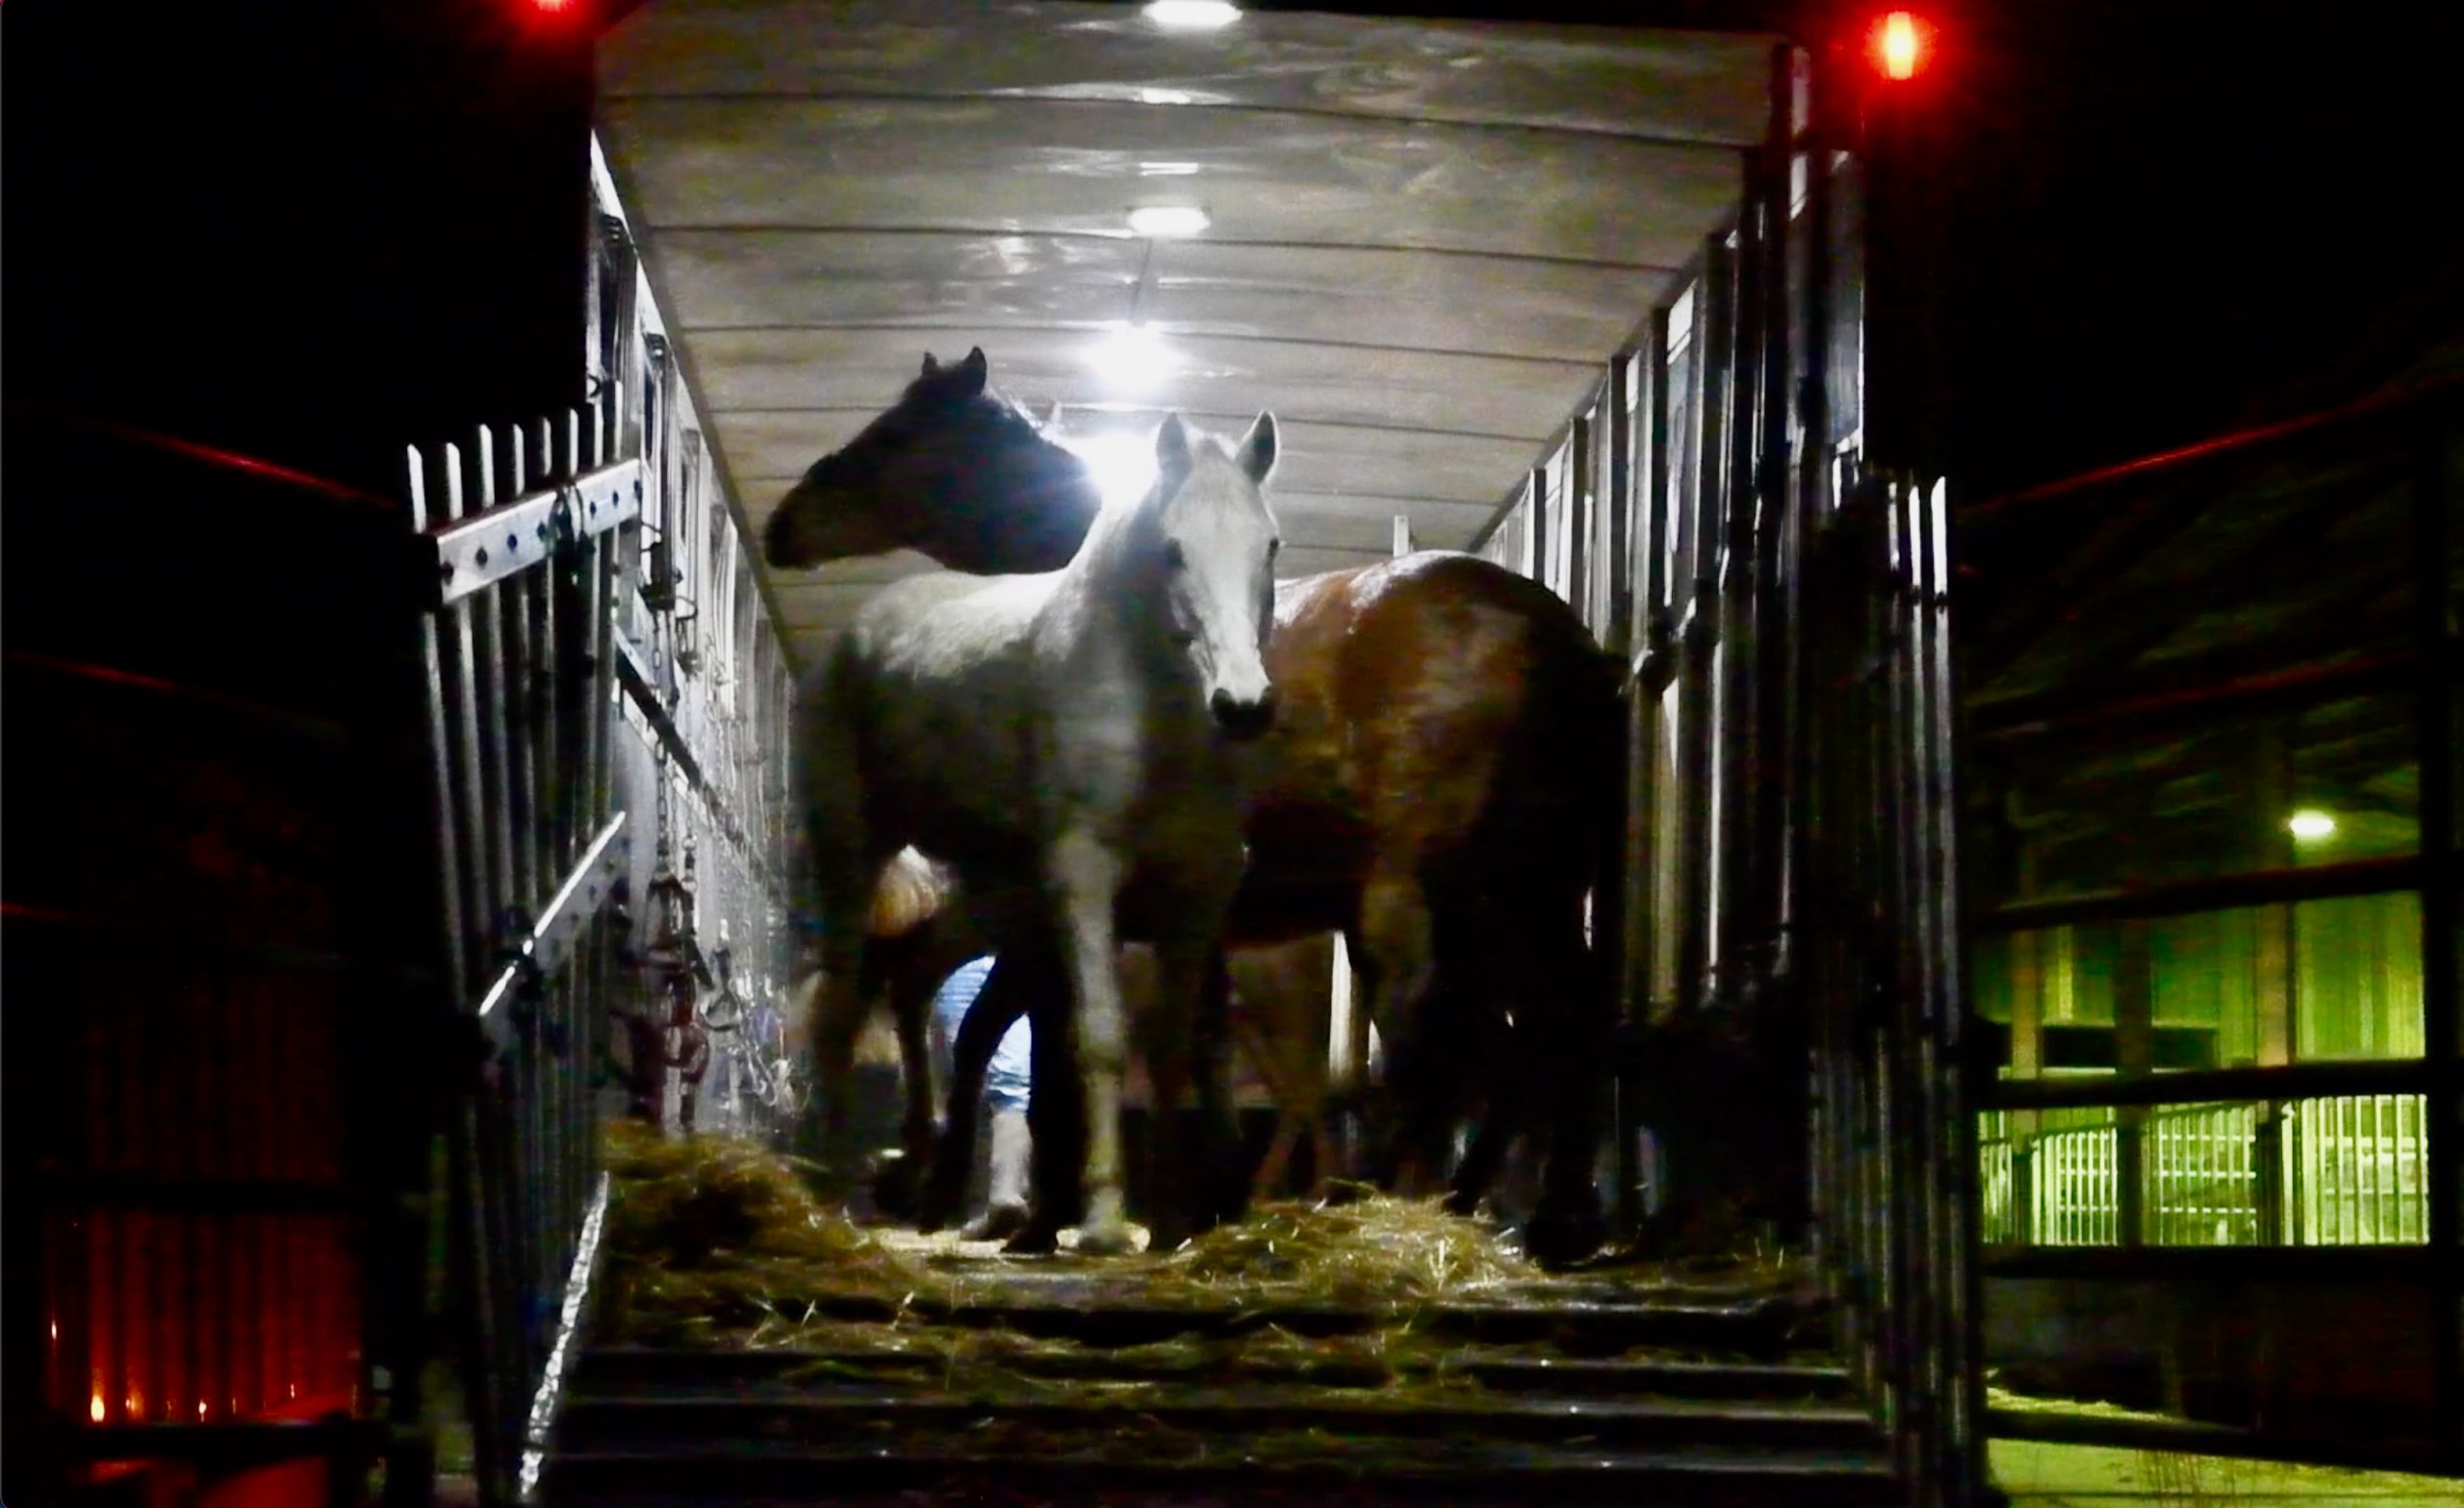 Animal Aid's Horse Slaughter Investigation - Animal Aid